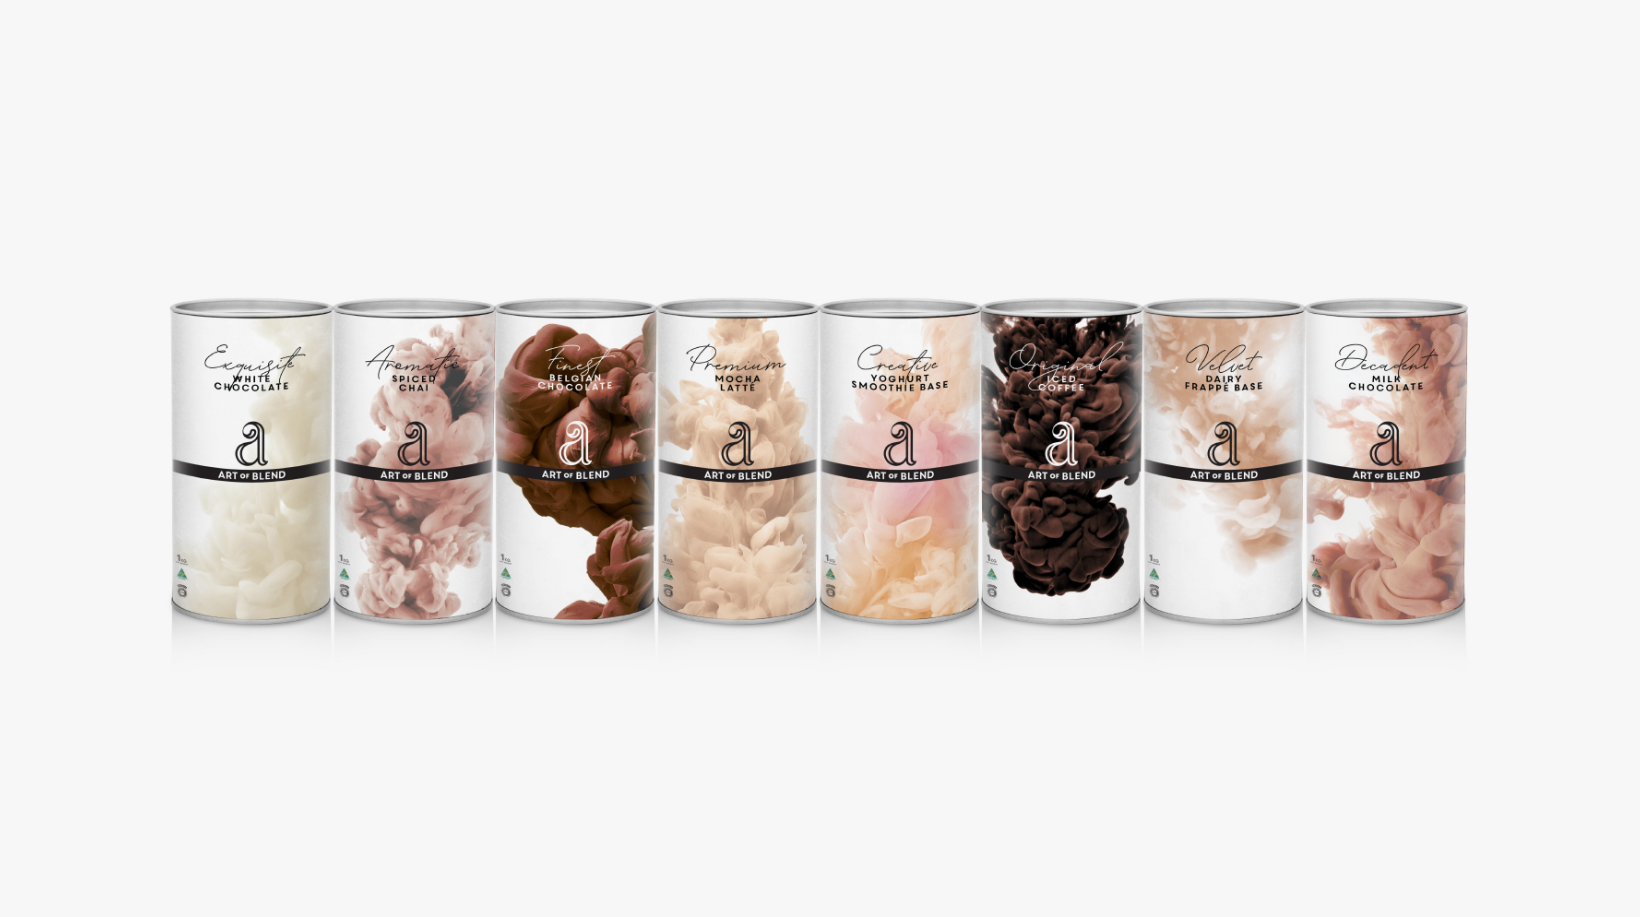 A row of 8 Art of Blend mix packages, including White Chocolate, Spiced Chai, Belgian Chocolate, Mocha Latte, Yogurt Smoothie Base, Iced Coffee, Dairy Frappe Base, and Milk Chocolate.